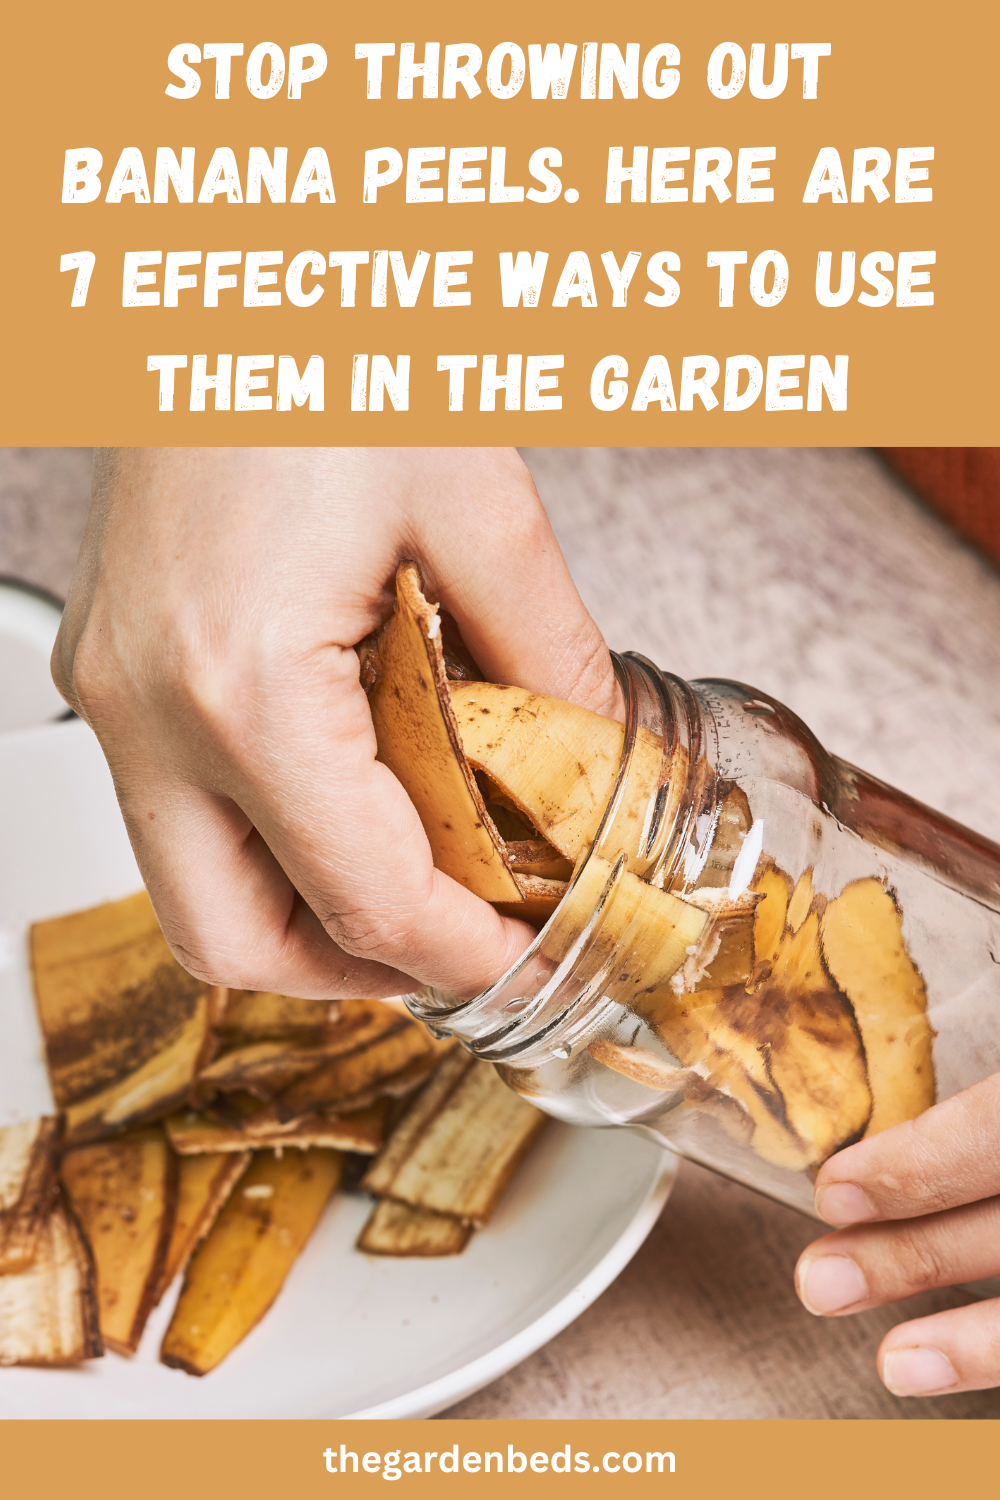 Stop Throwing Out Banana Peels Here Are 7 Effective Ways To Use Them